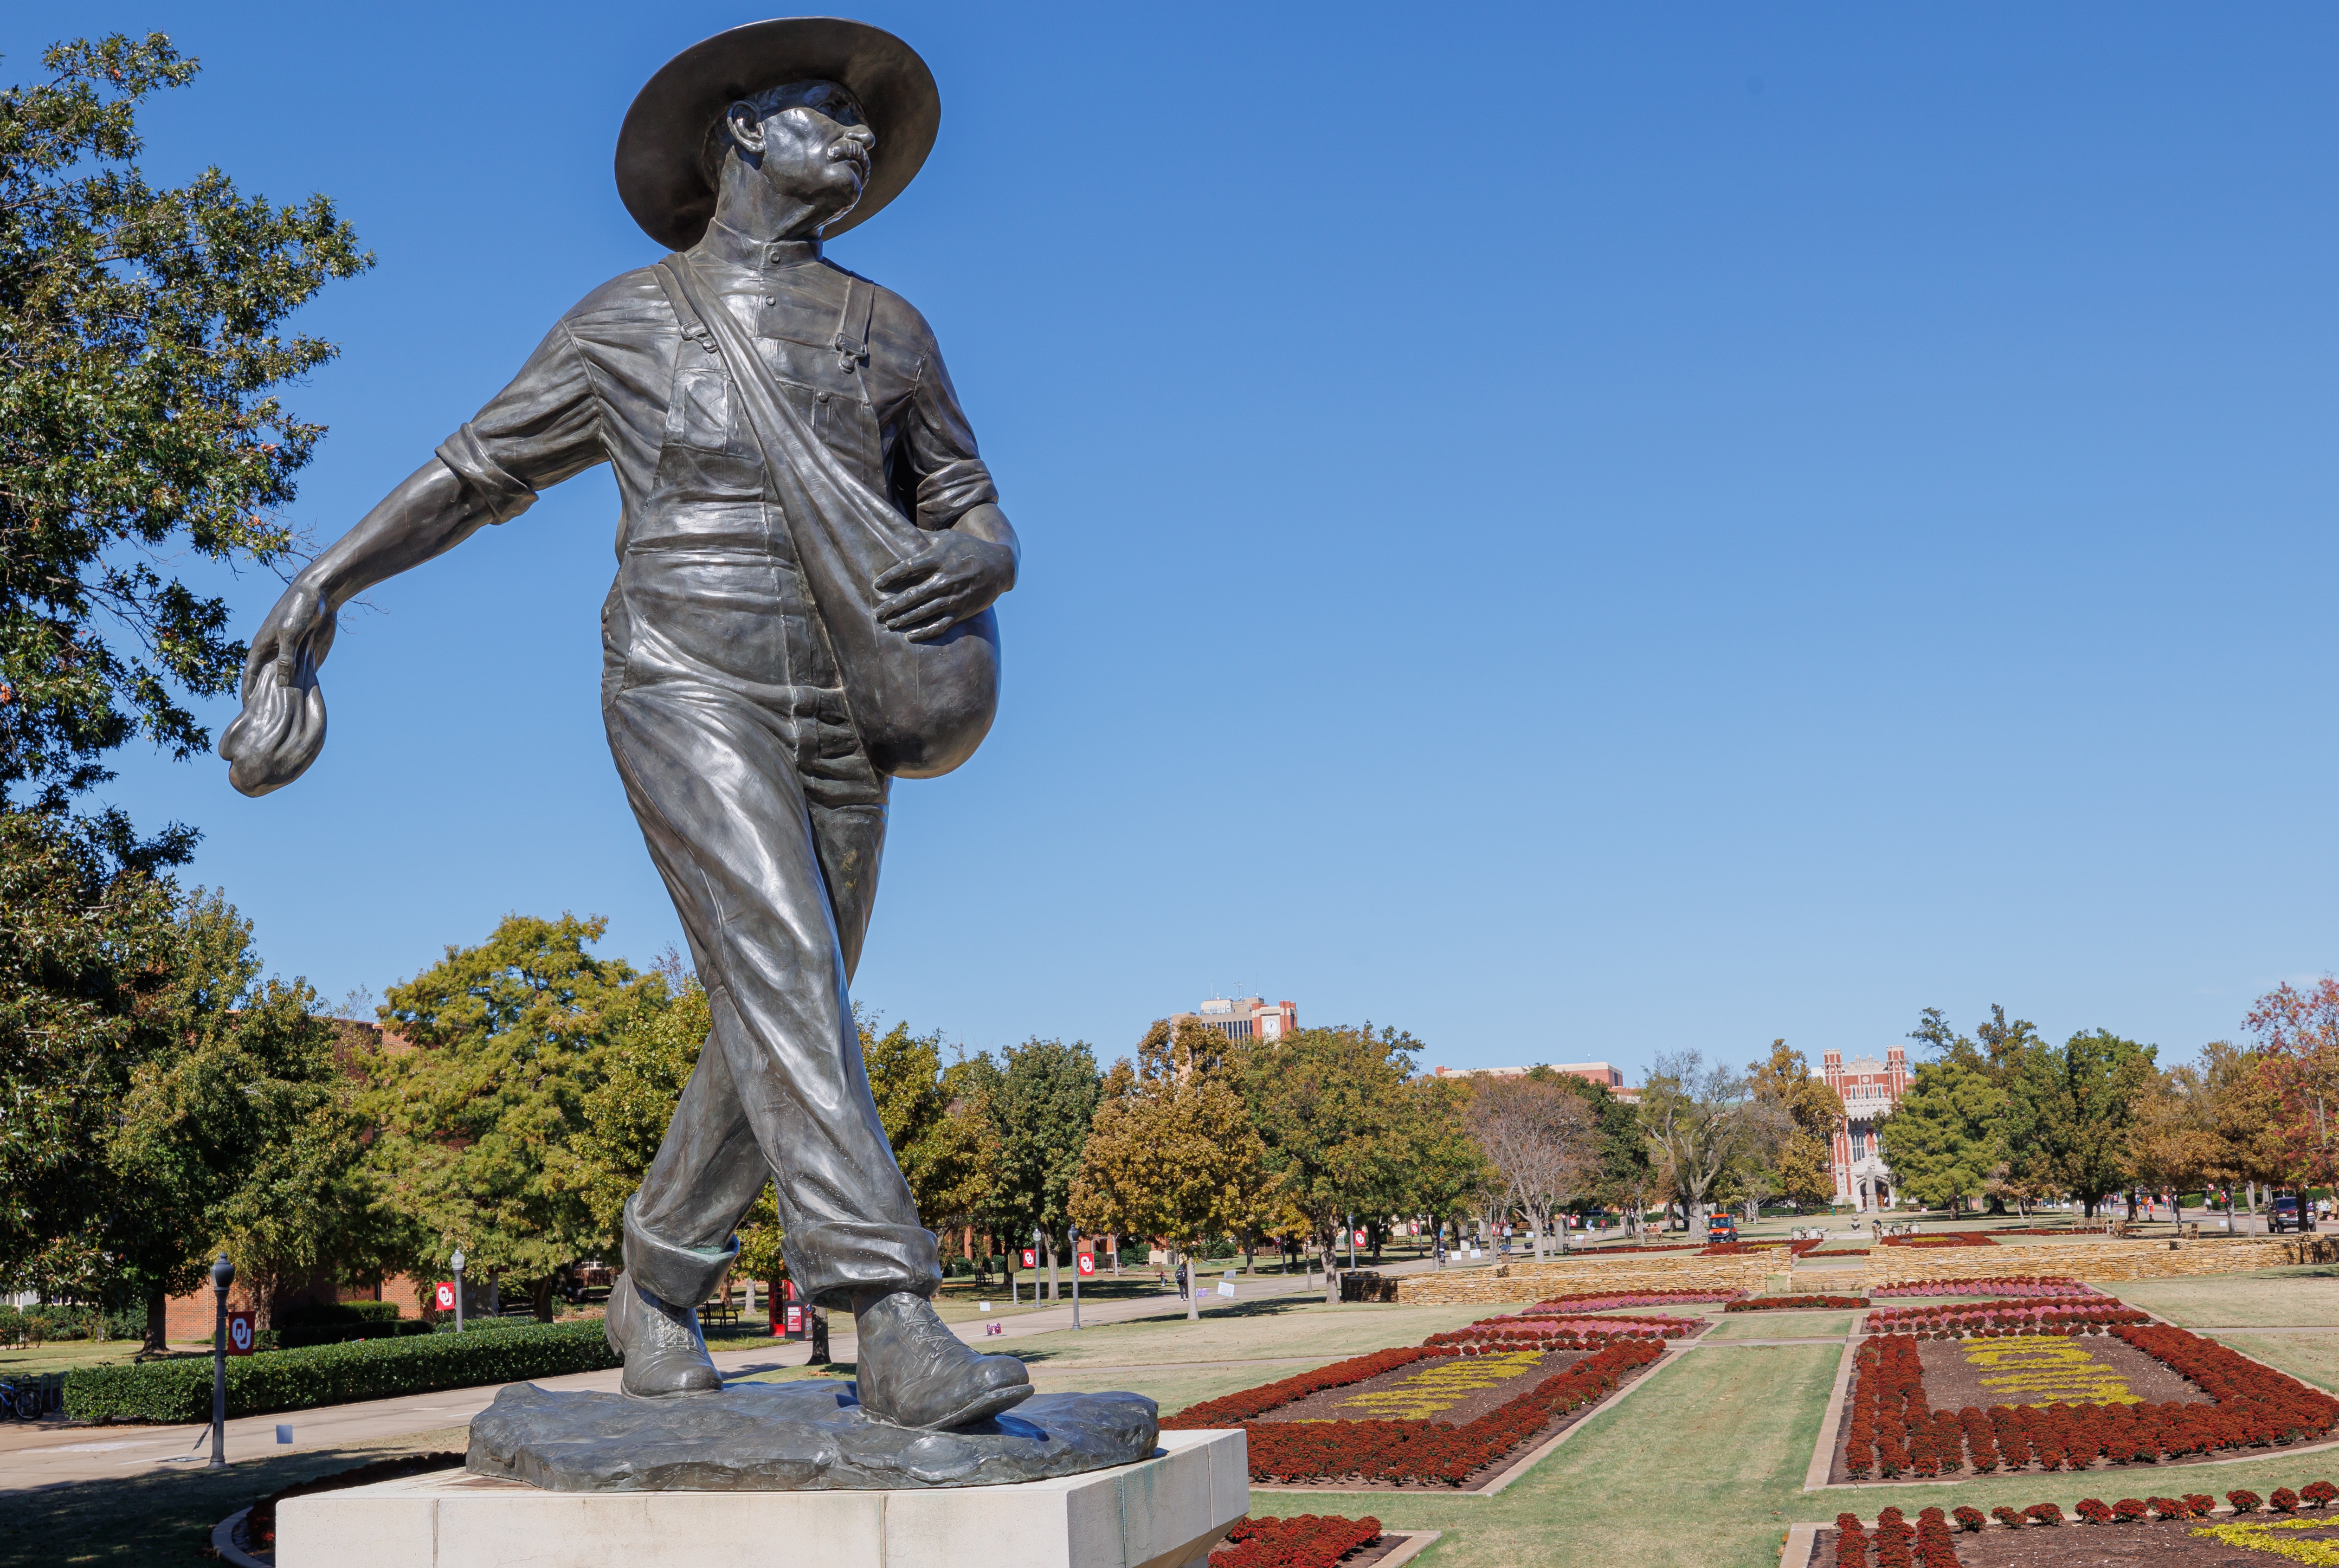 The Seed Sower statue on the South Oval.